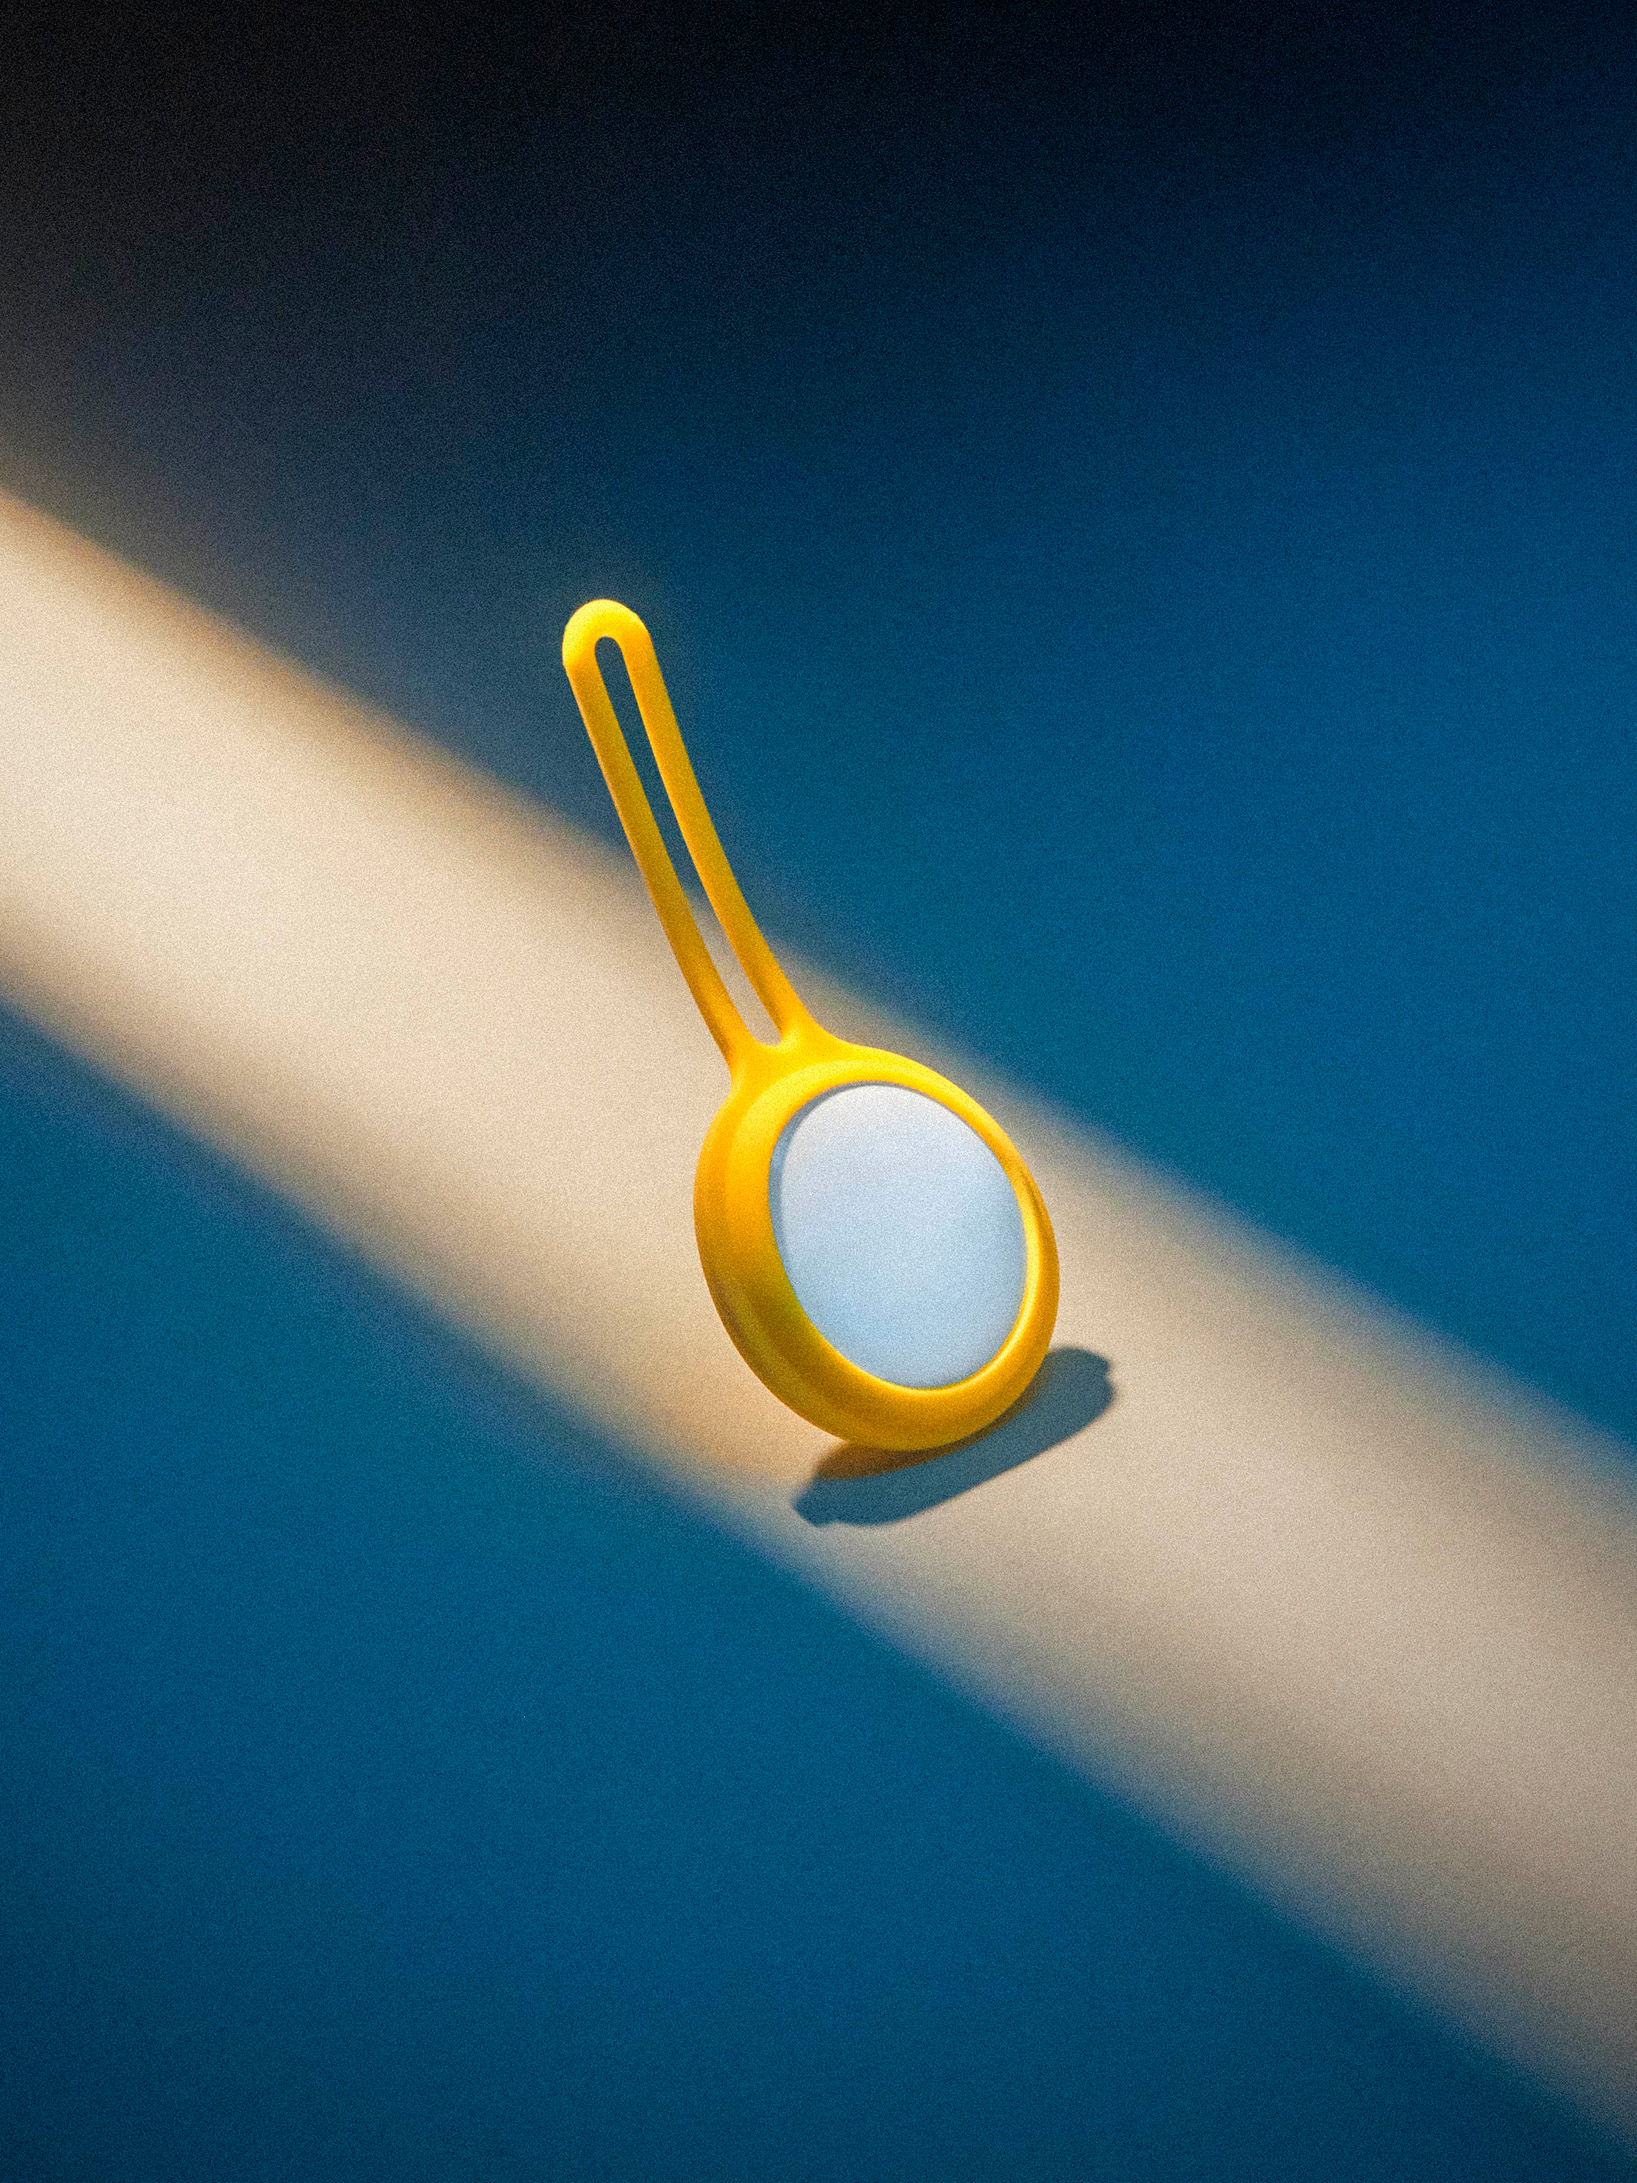 Apple air tag in a yellow rubber holder in a beam of light on a blue background